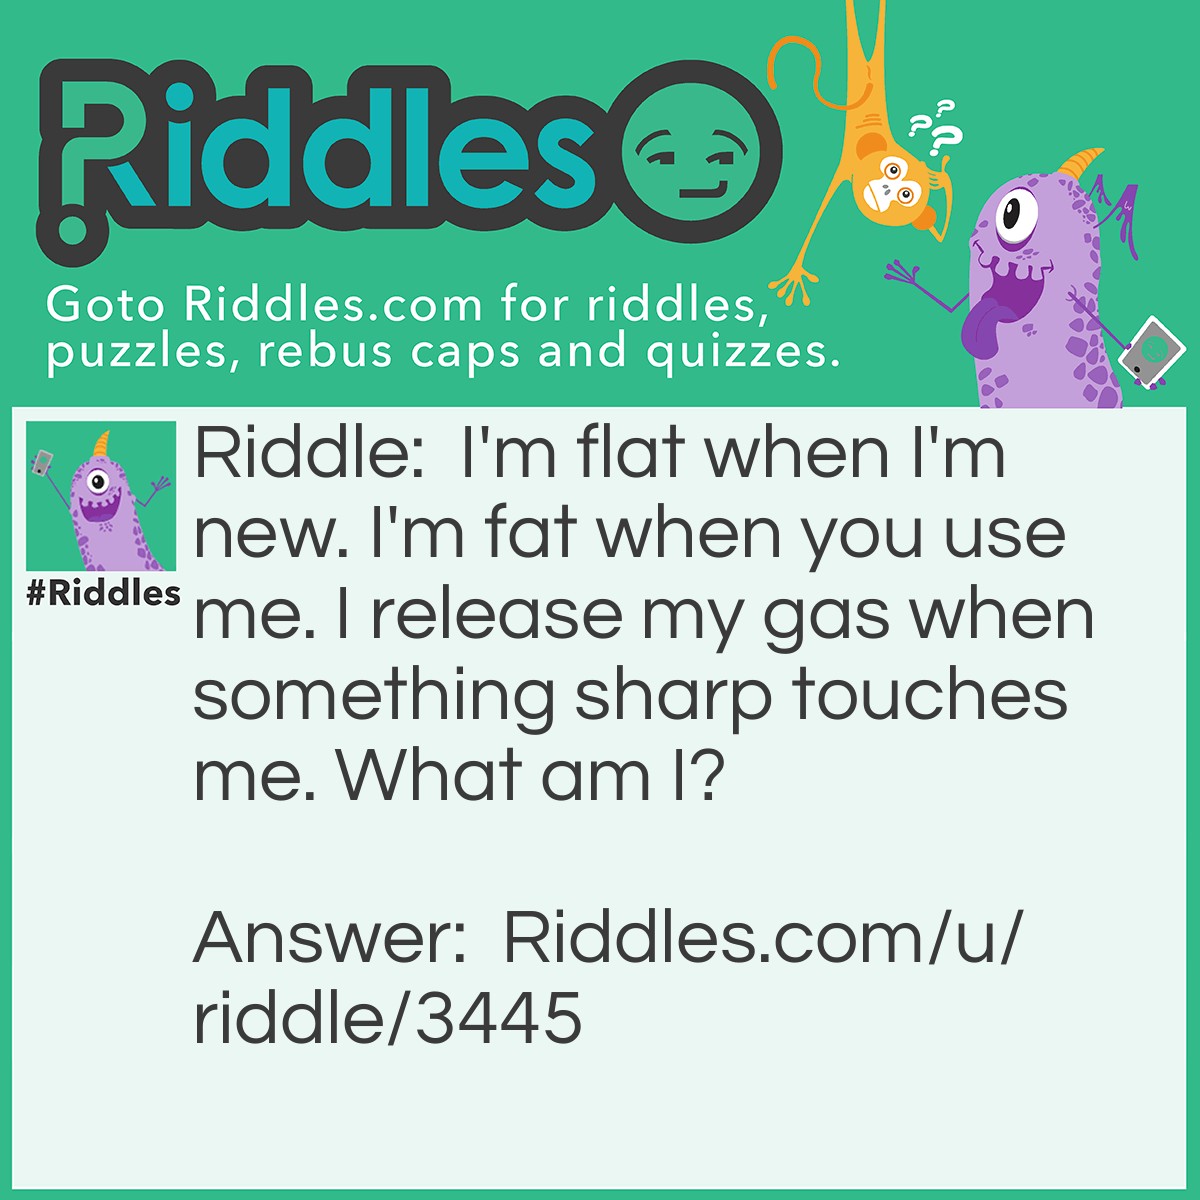 Riddle: I'm flat when I'm new. I'm fat when you use me. I release my gas when something sharp touches me. What am I? Answer: A balloon.